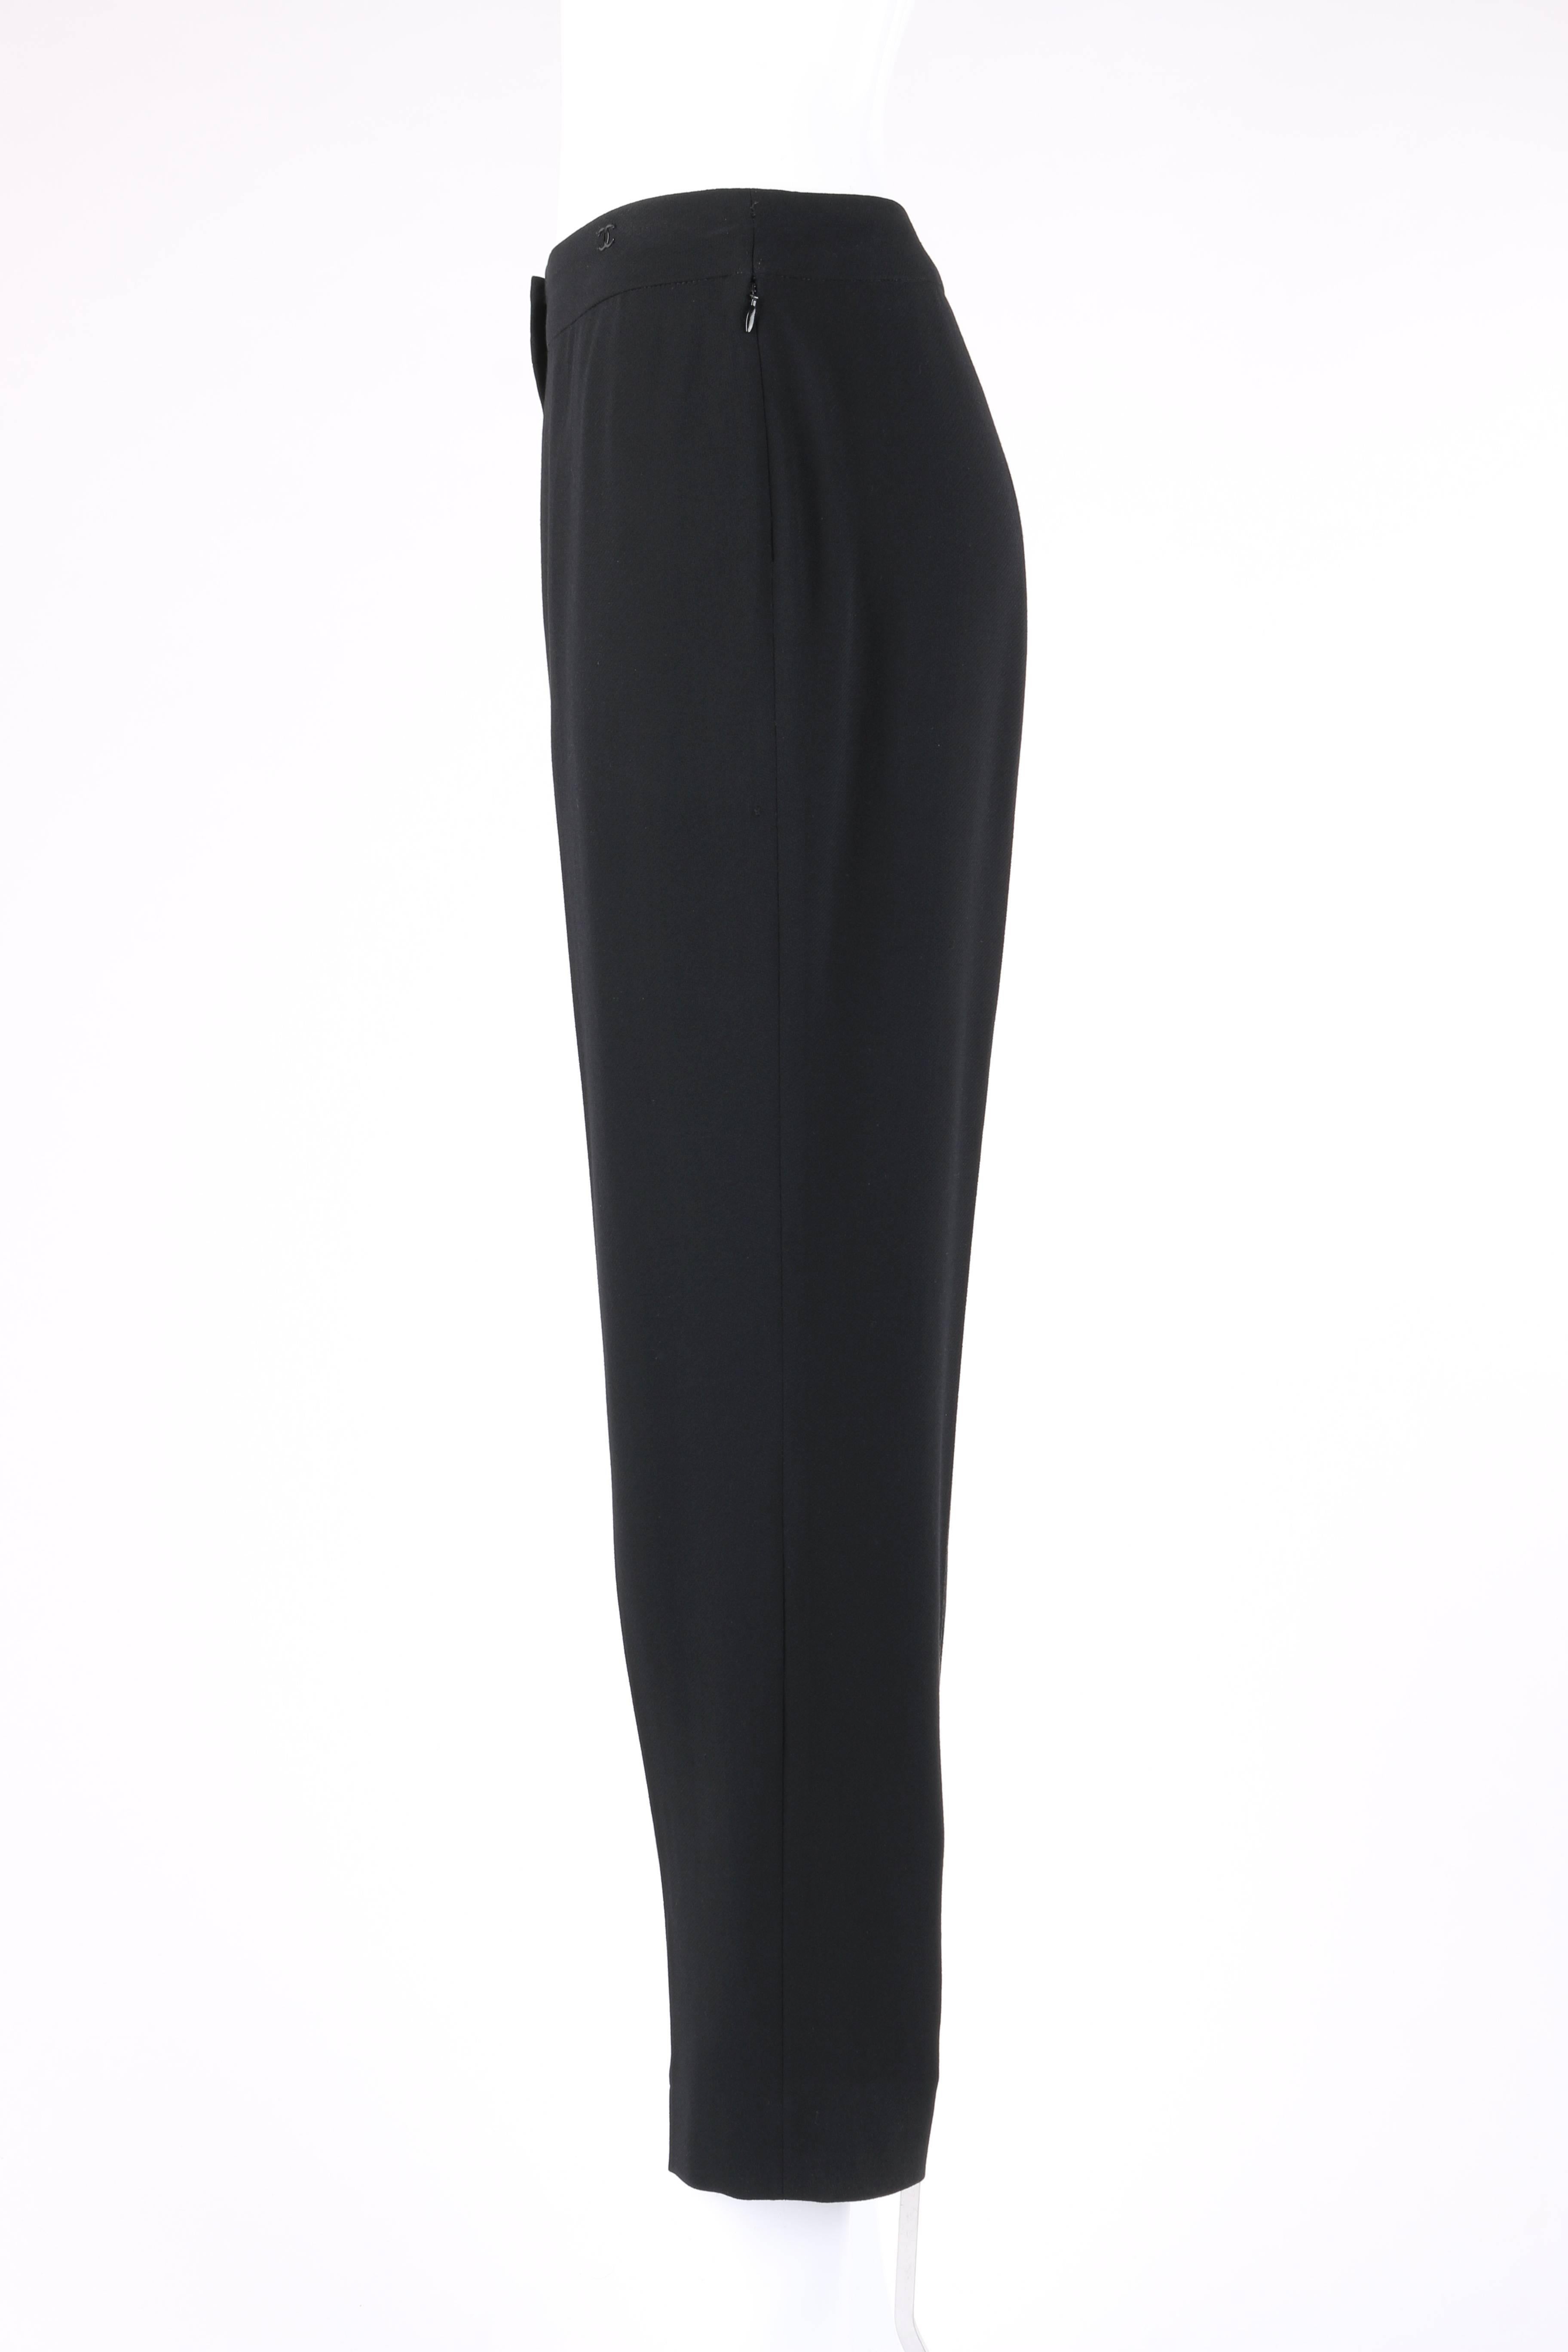 CHANEL S/S 2003 Classic Black Wool Slim Cut Cropped Pants Trousers 1